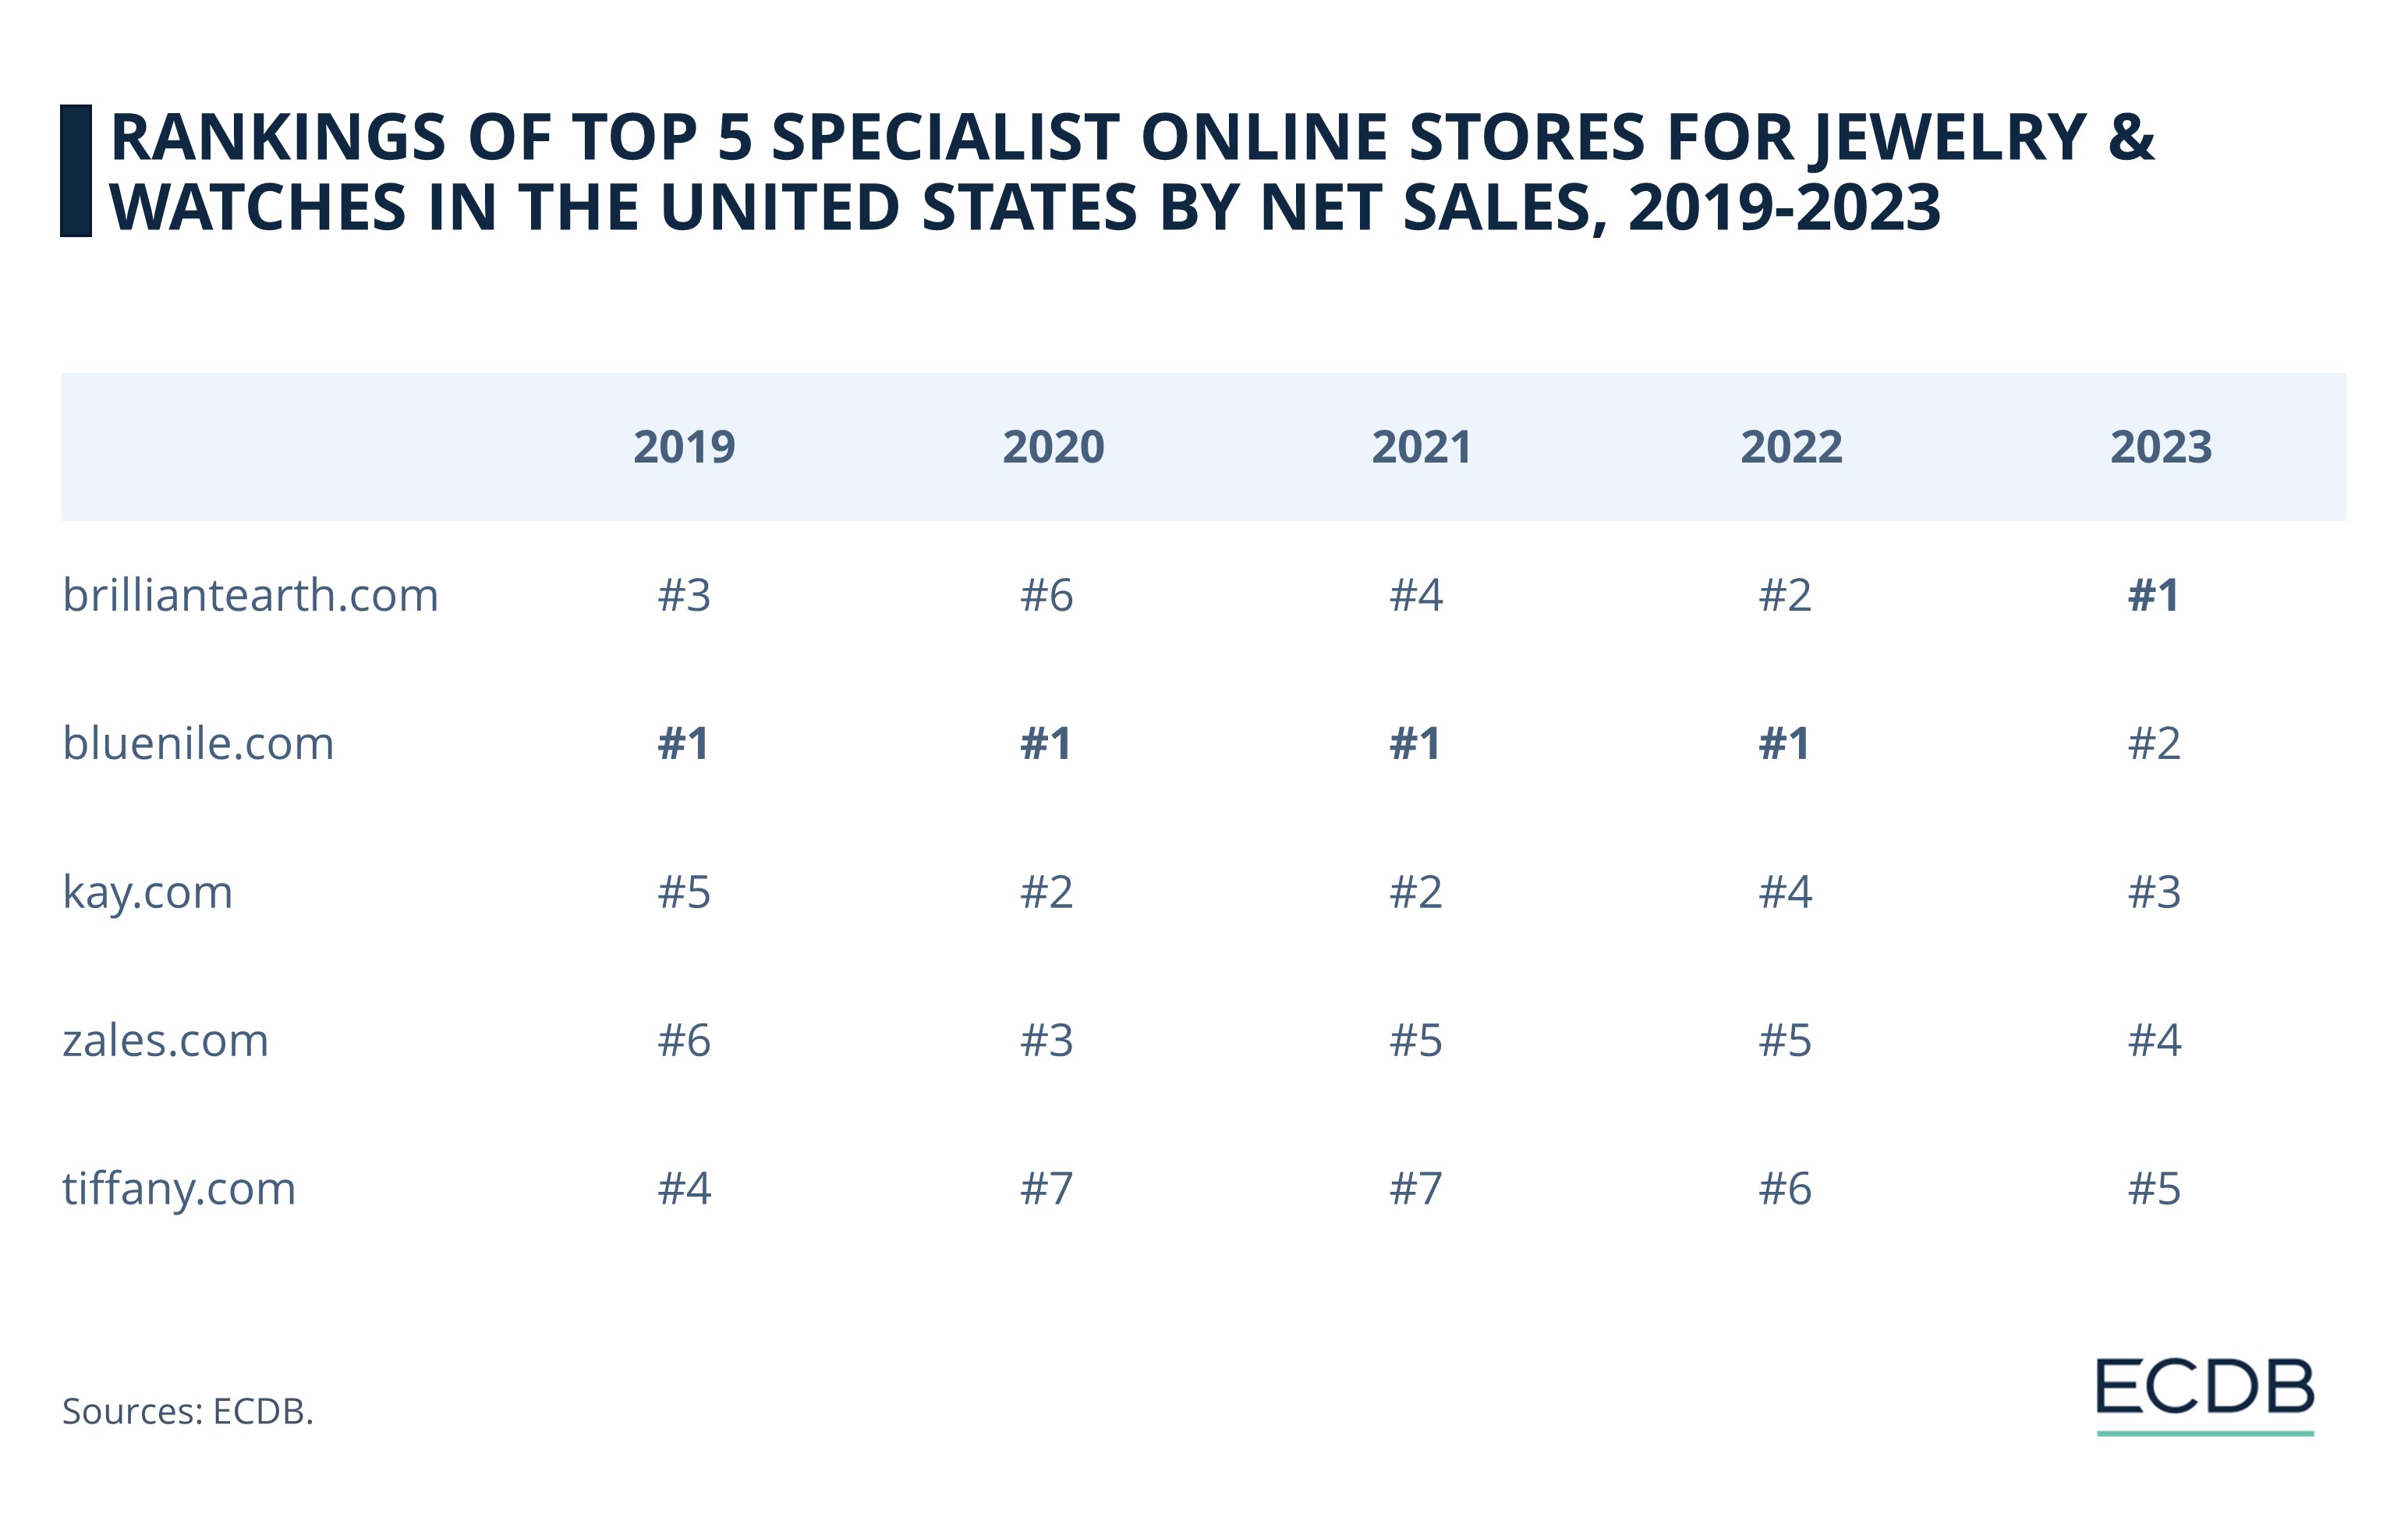 Rankıngs of Top 5 U.S. Onlıne Stores for Jewelry & Watches, 2019-2023